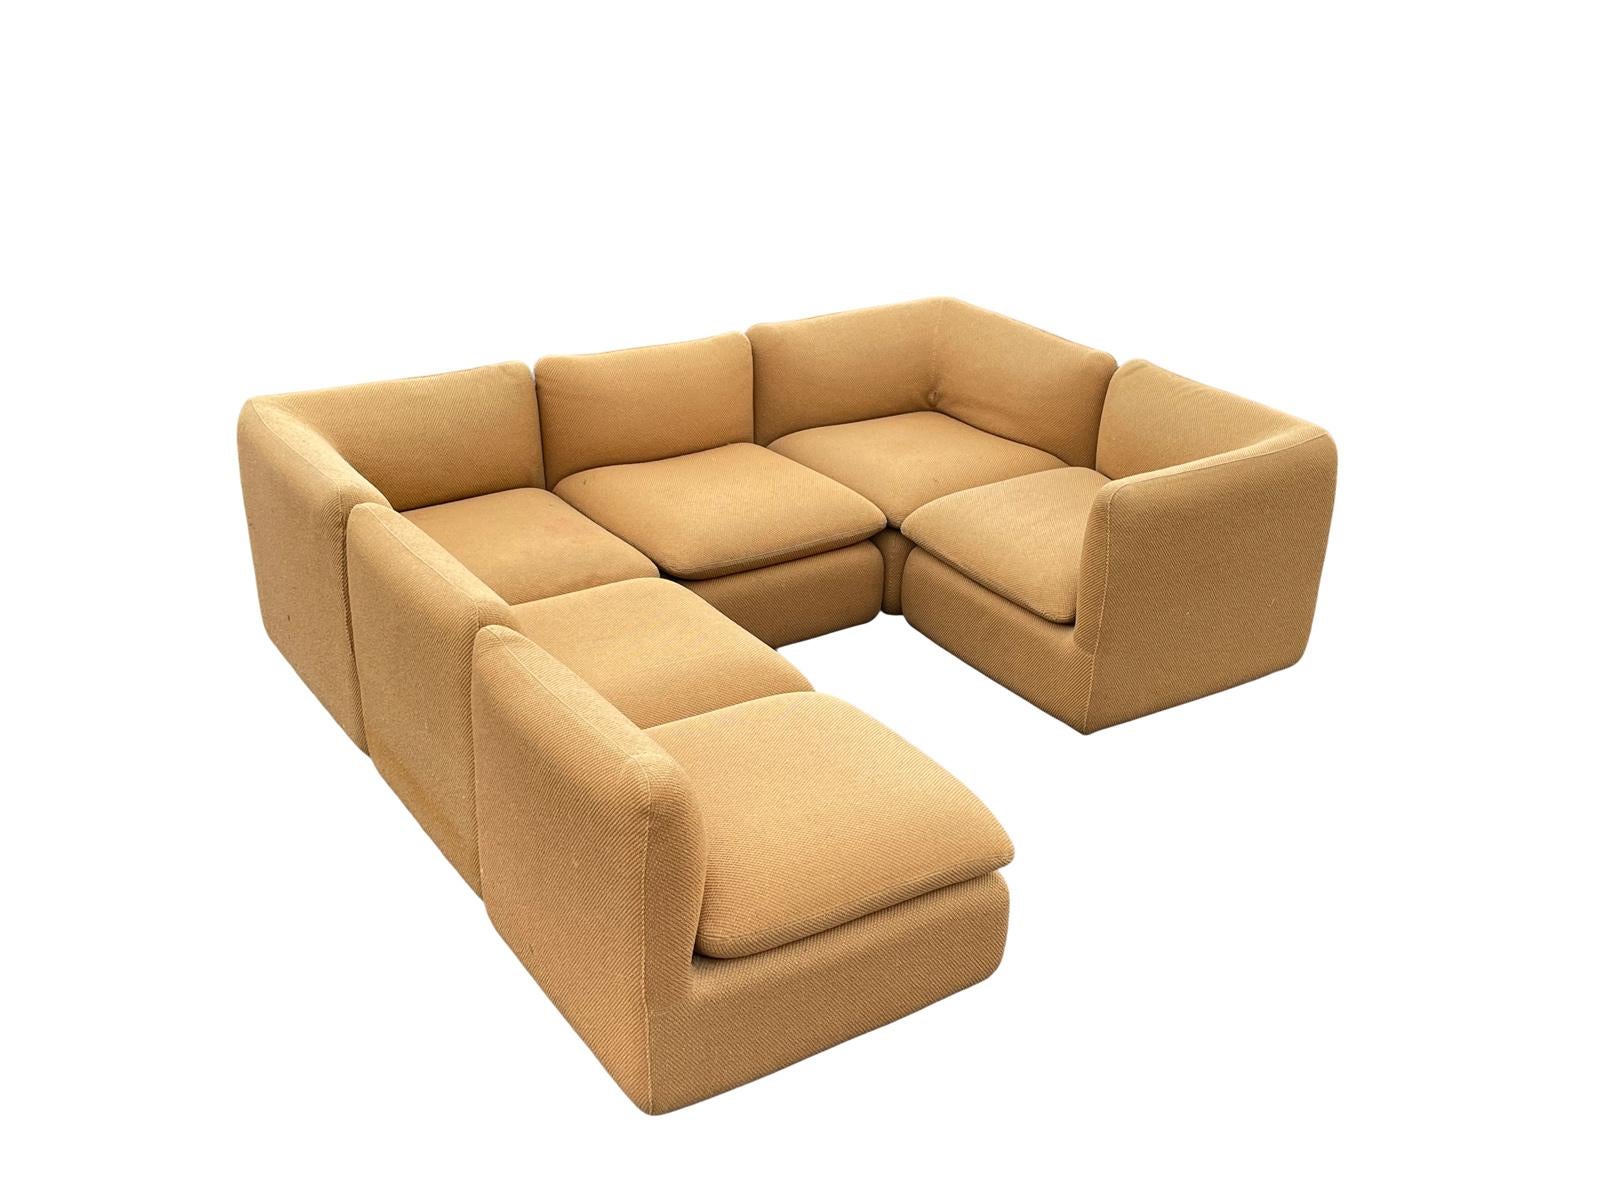 1980s Modular Ganging ELYSÉE Sofa Unit Sectional by Steelcase  In Good Condition For Sale In Bensalem, PA